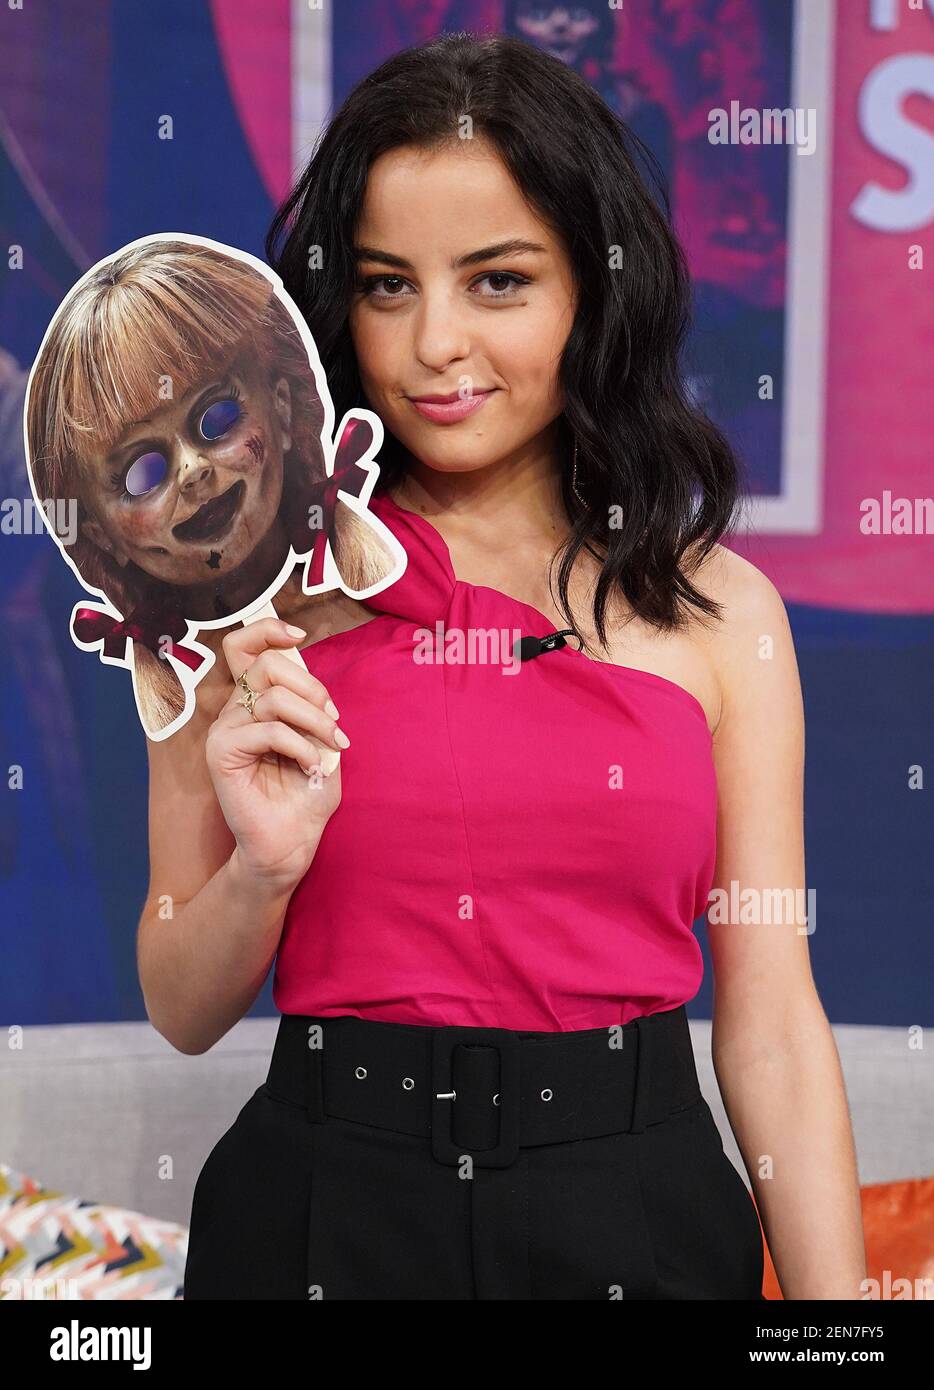 MIAMI, FL - JUN 25: Actress Katie Sarife is seen During "Despiertra  America" morning show to promote the movie "Annabelle Comes Home" on June  25, 2019 in Miami, Florida. (Photo by Alberto